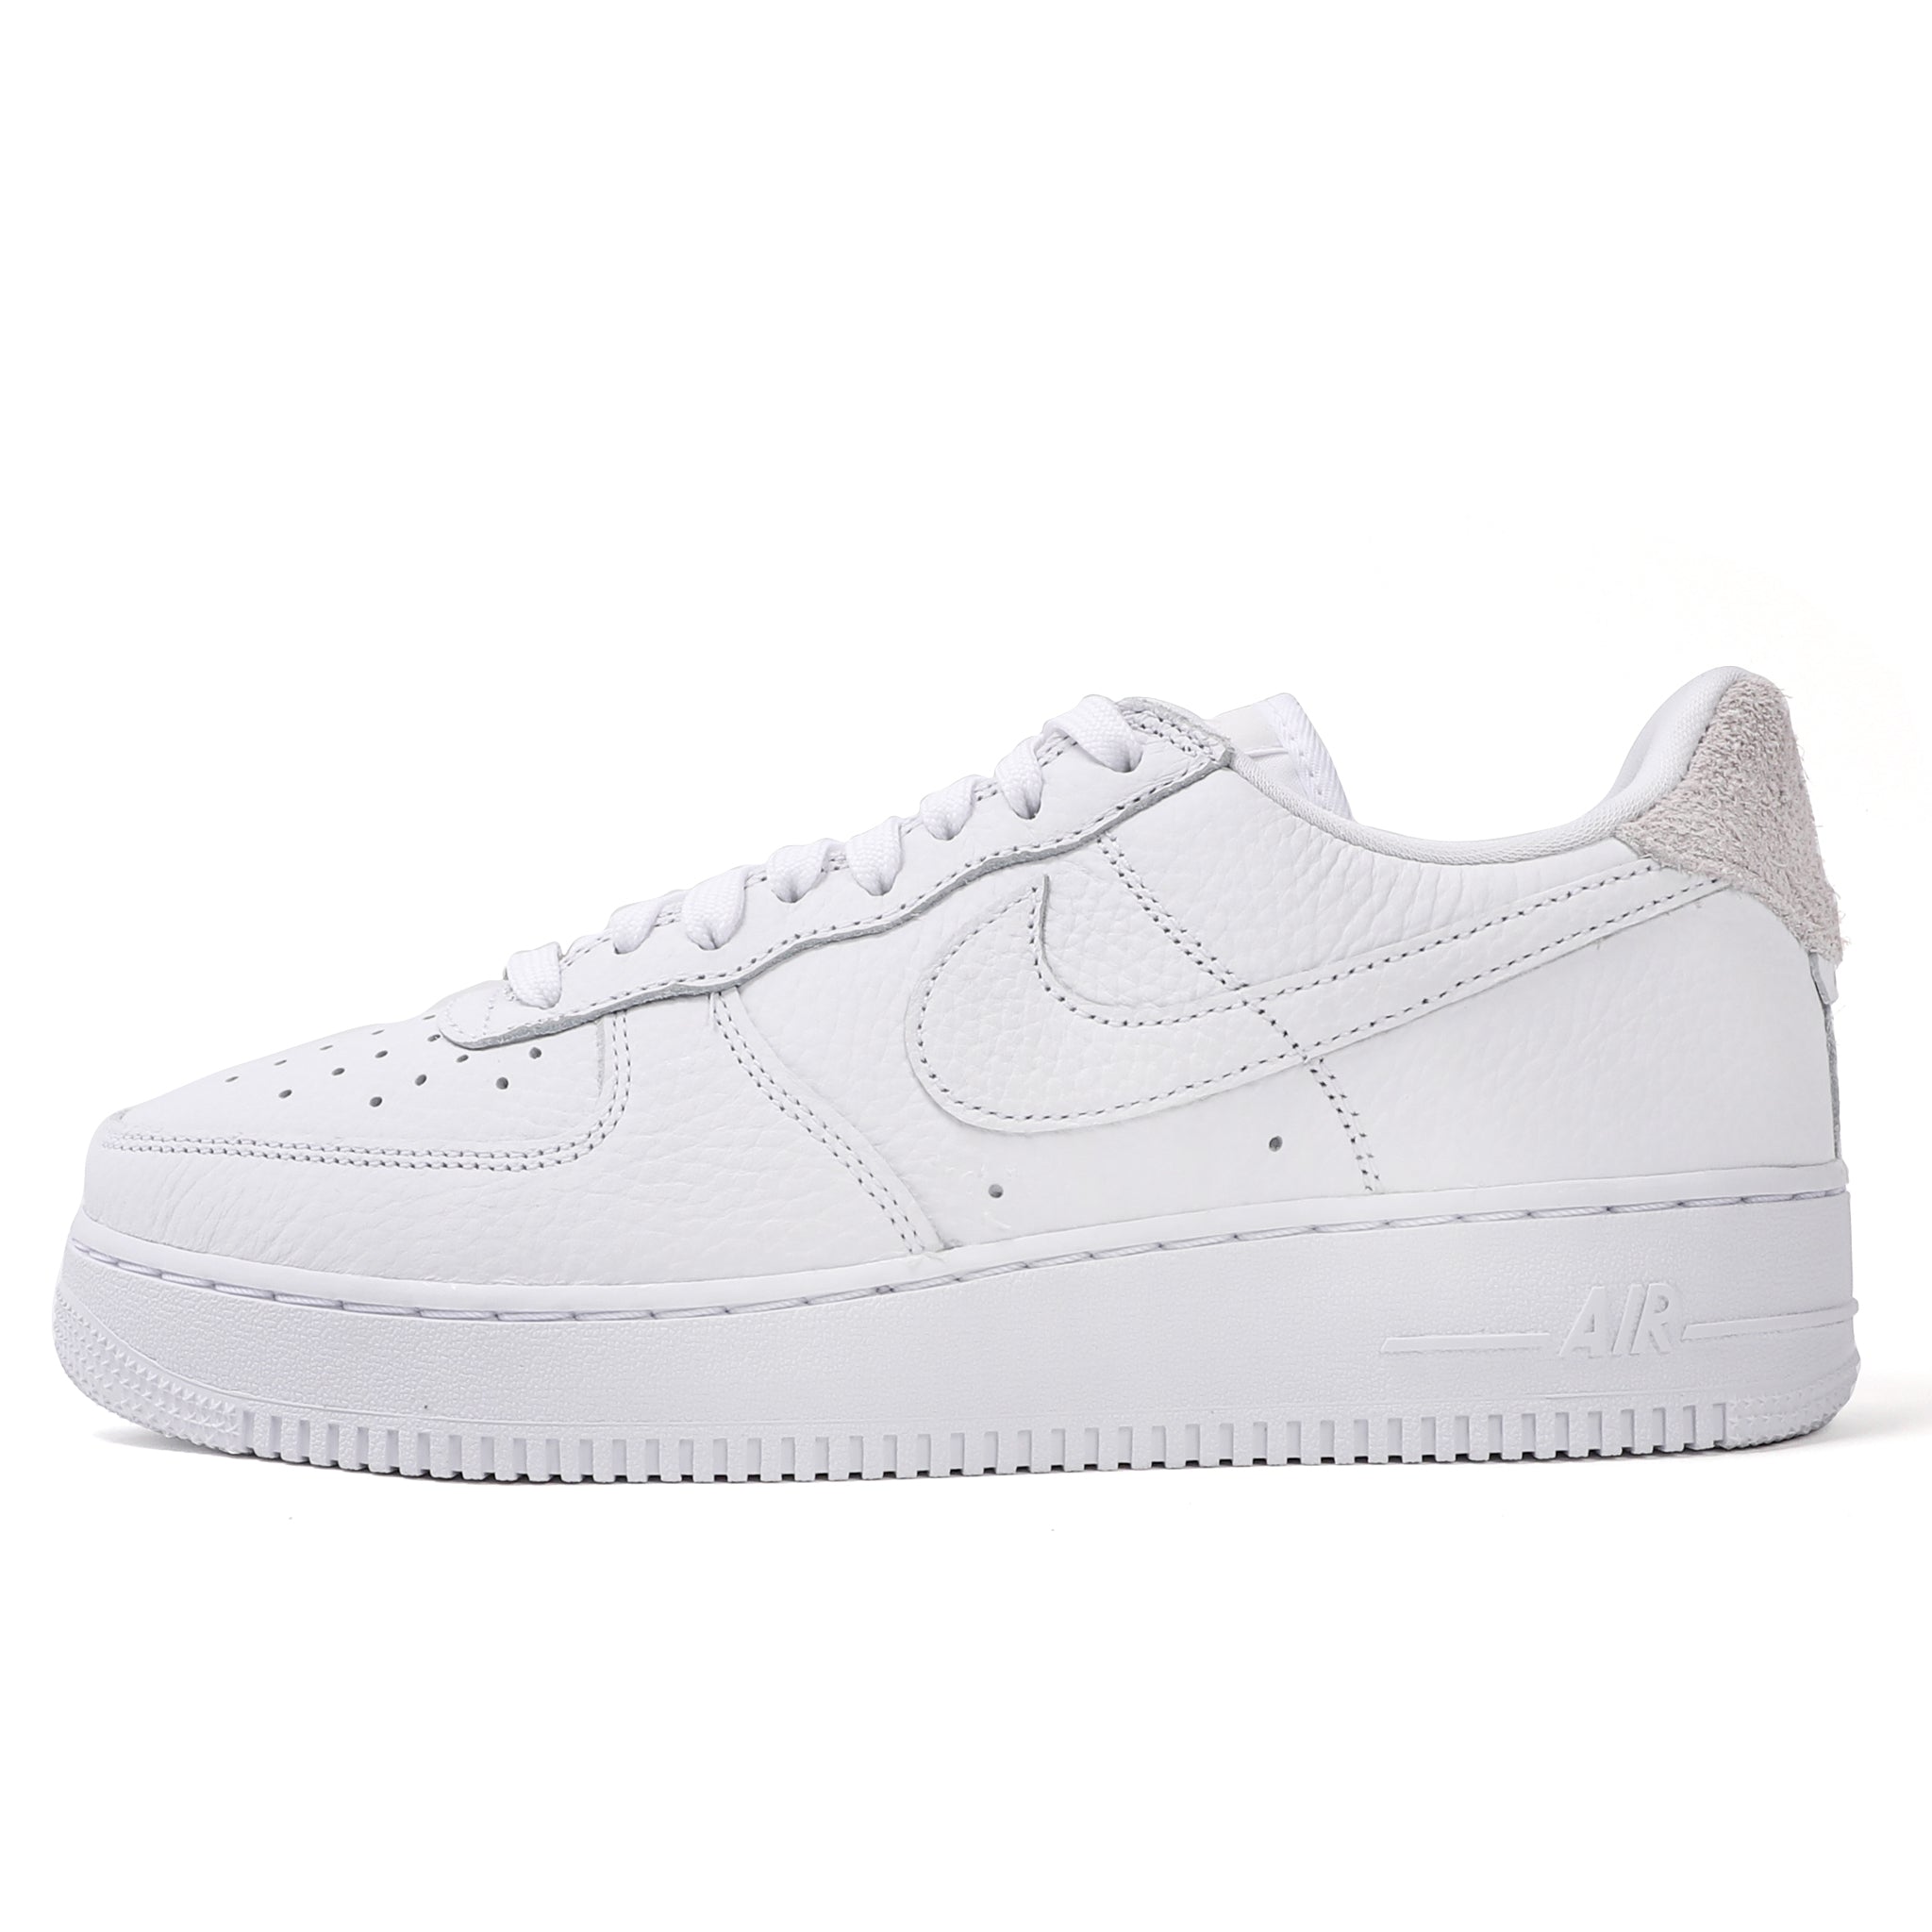 air force 1 craft white grey